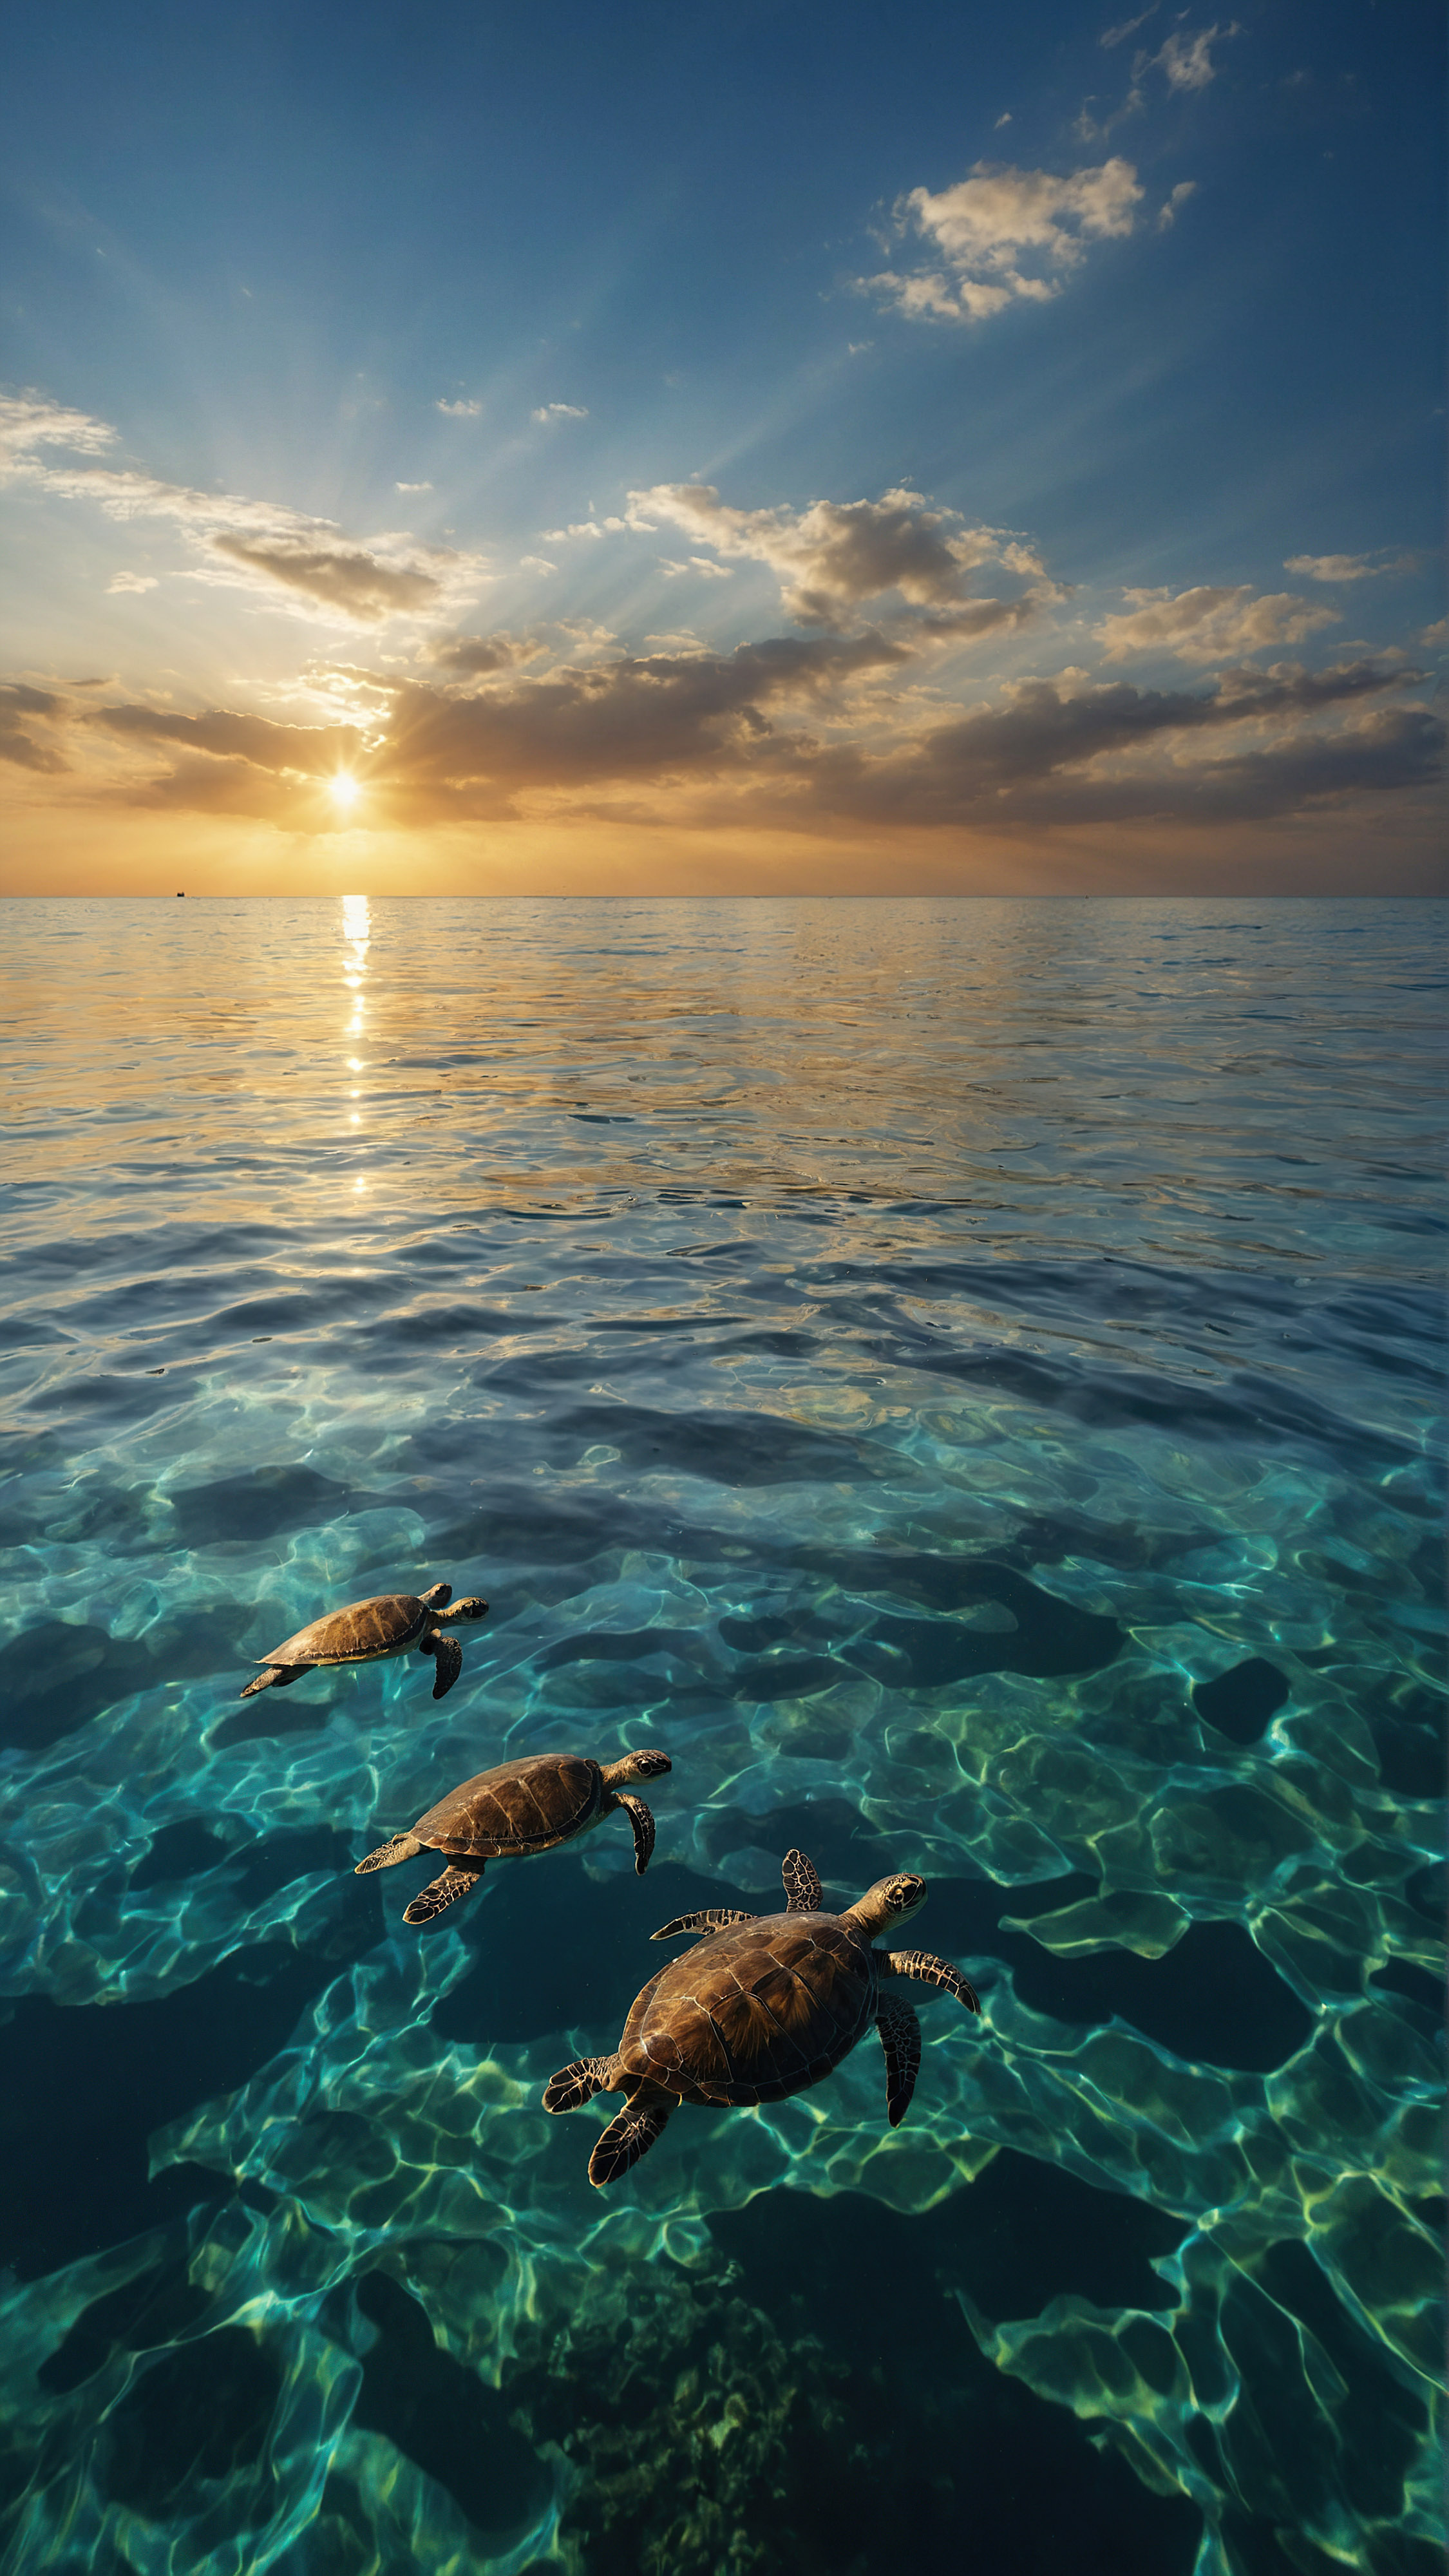 Get mesmerized with our iPhone 4K wallpaper to download, featuring scene where the underwater world meets the sunset sky, with turtles gracefully swimming near the sea bed, illuminated by rays of light penetrating the clear blue-green water.